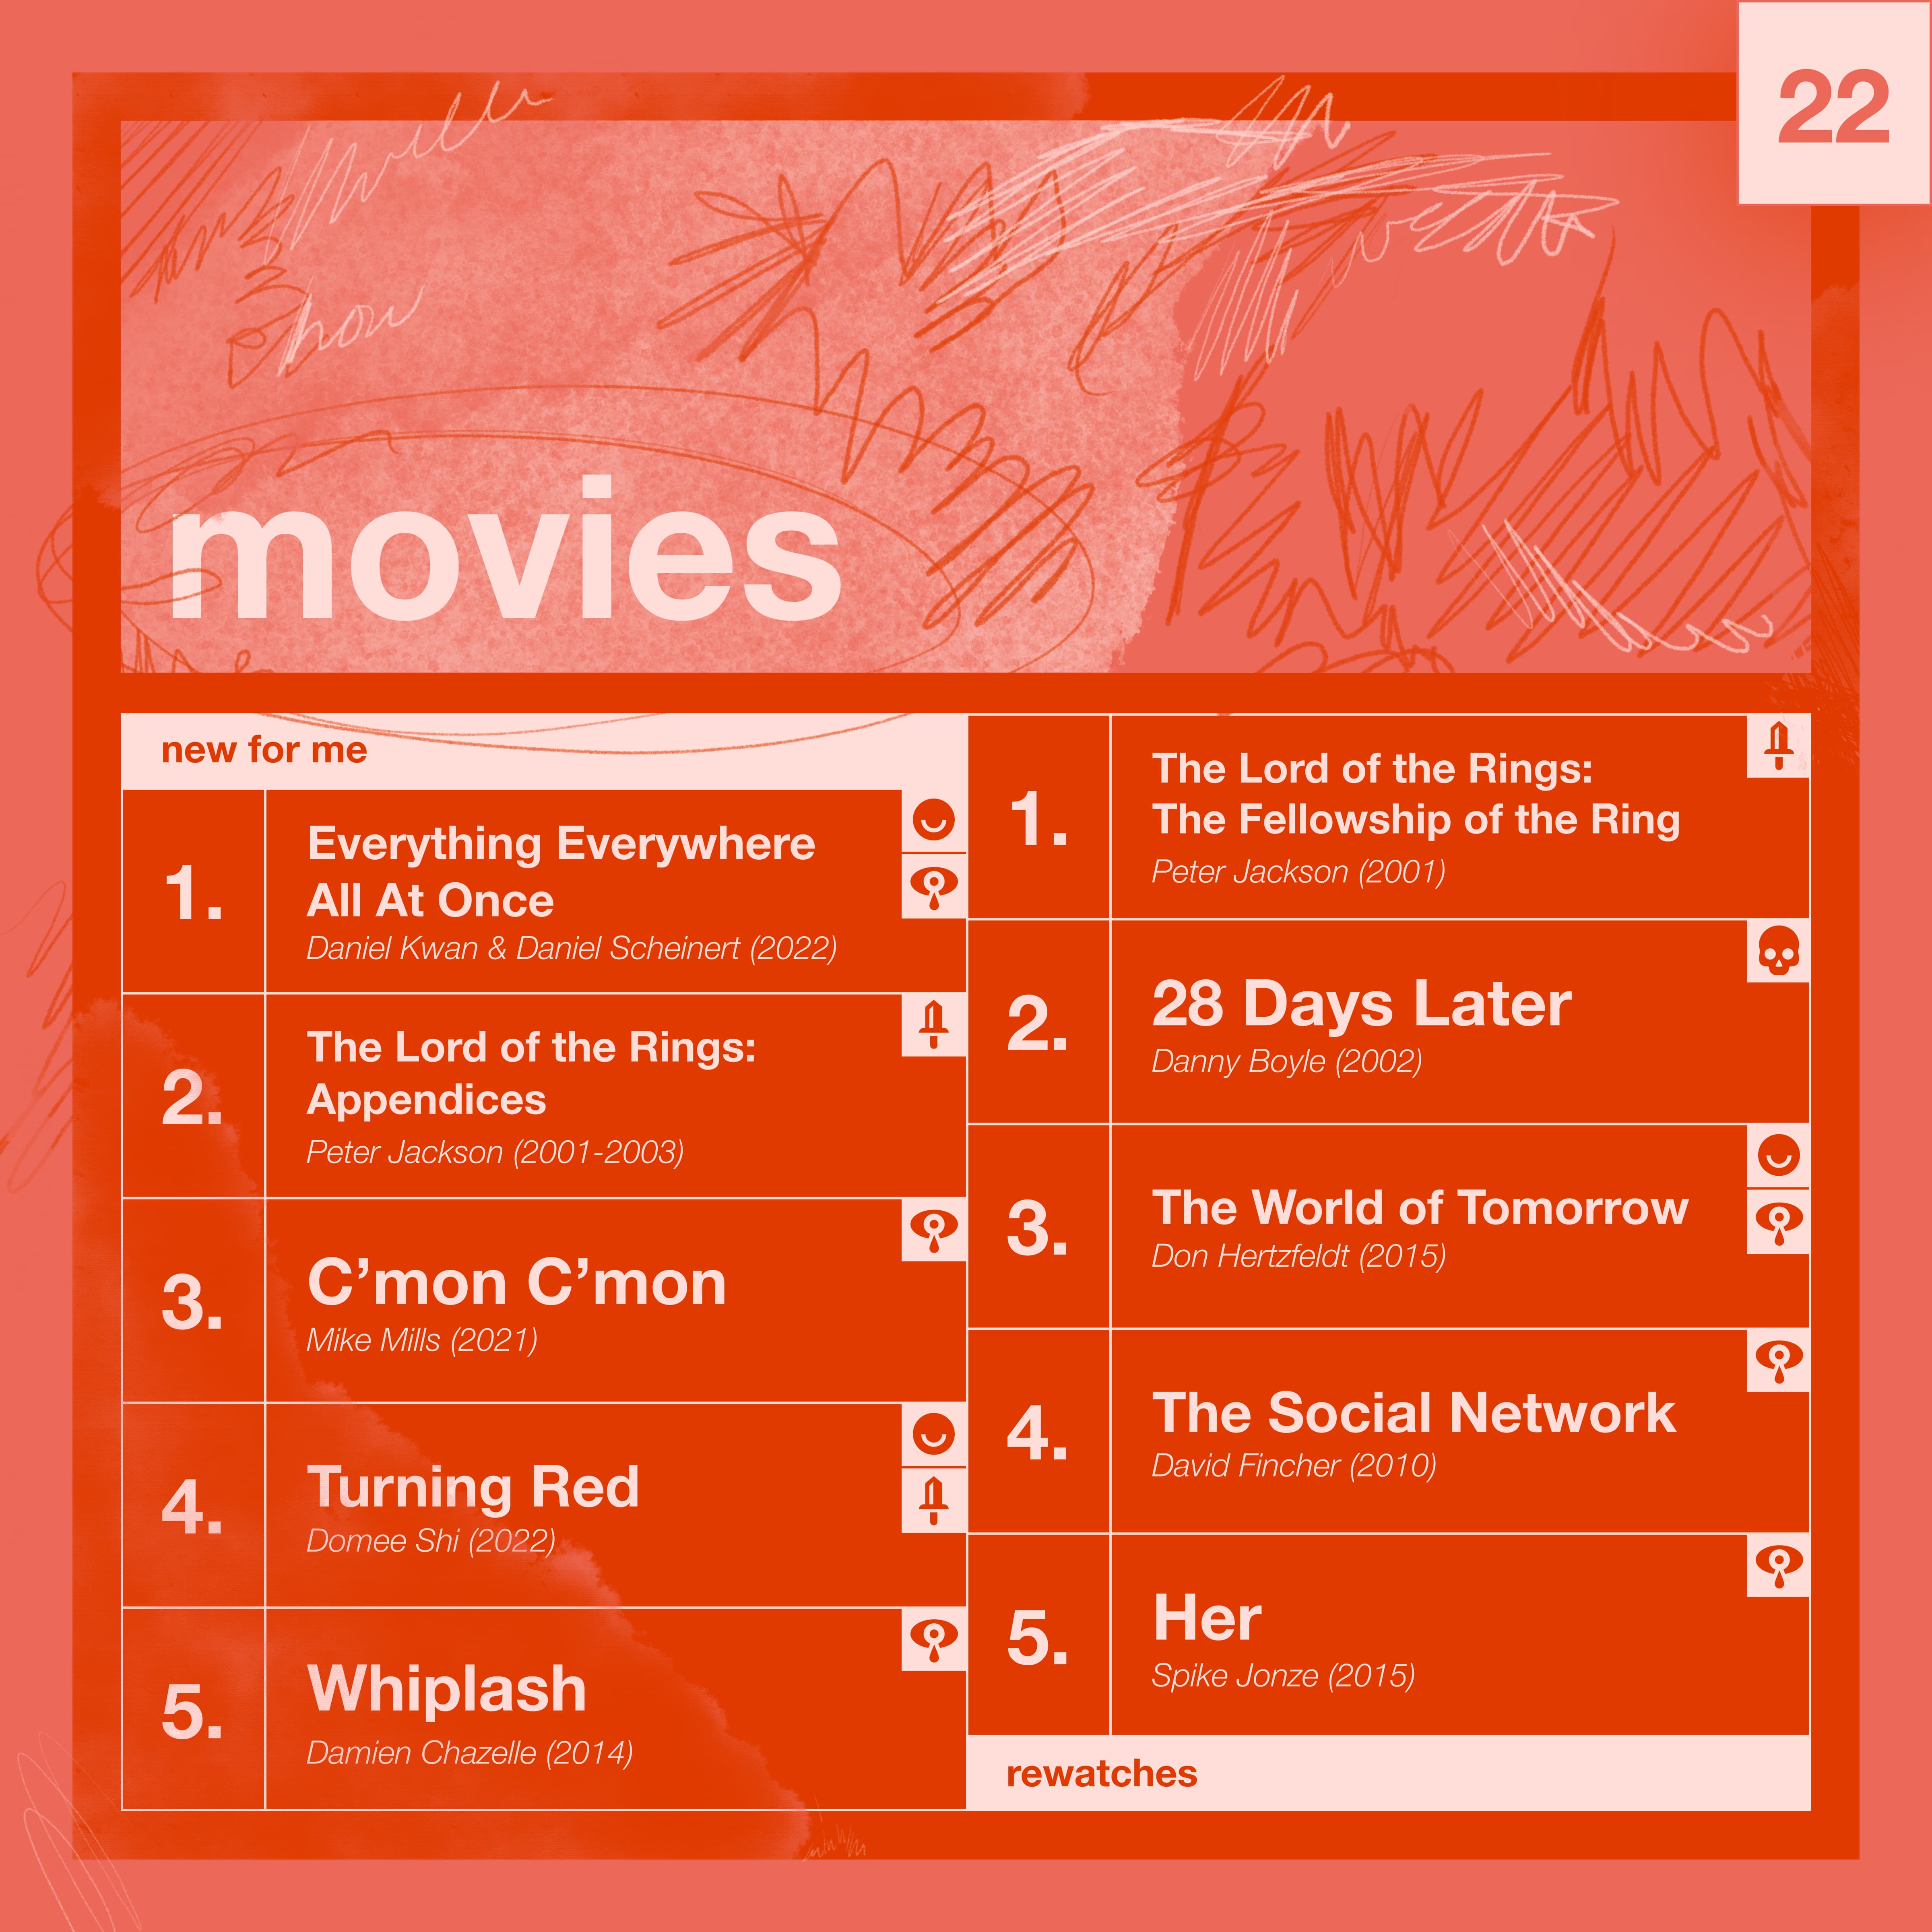 Top movies of the year